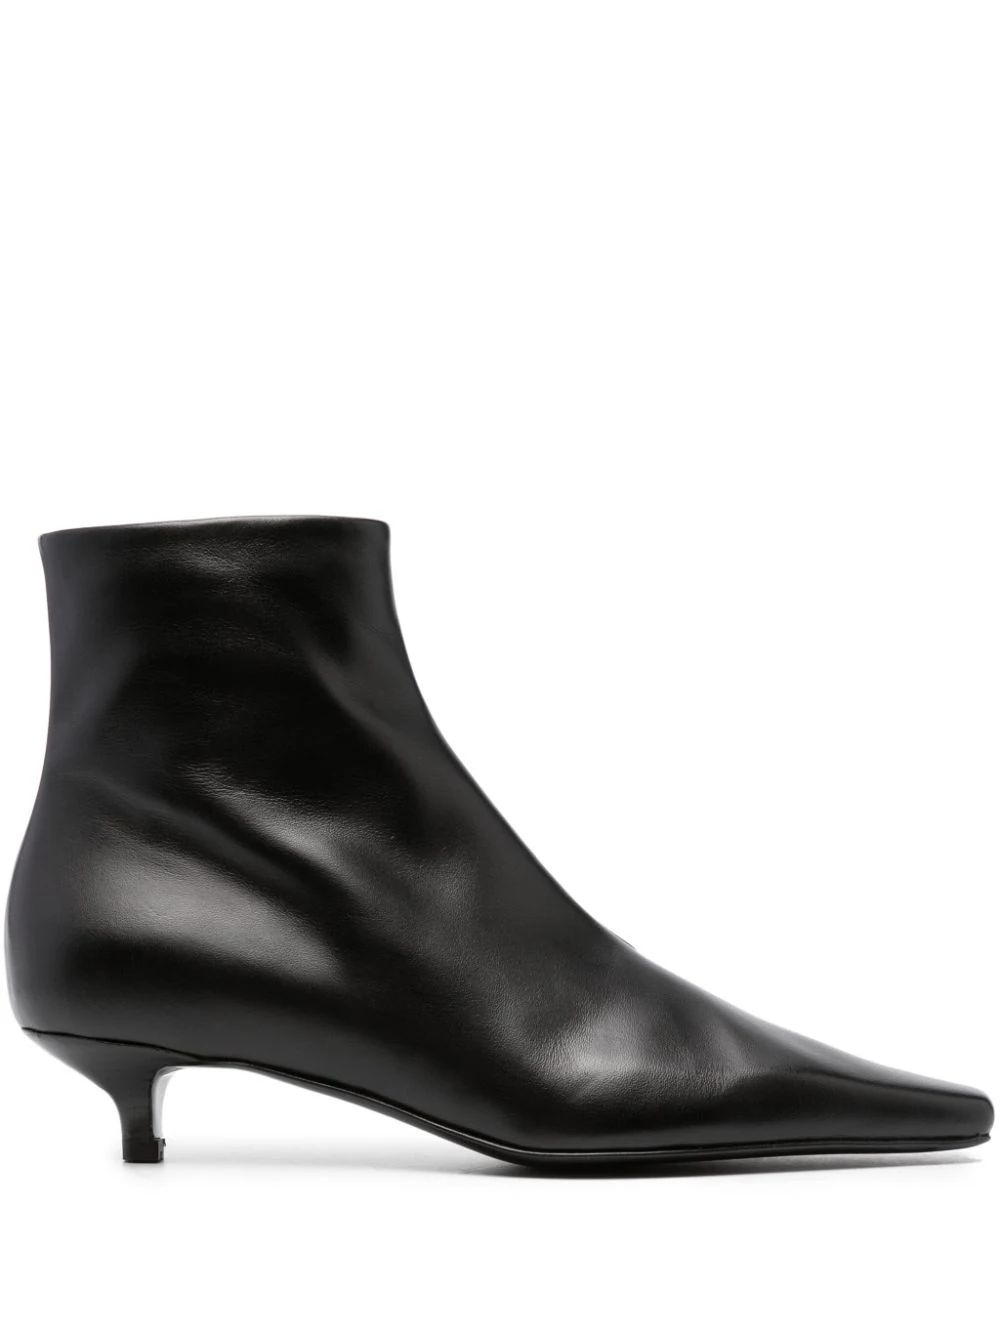 TOTEME The Slim 35mm Ankle Boots - Farfetch | Farfetch Global